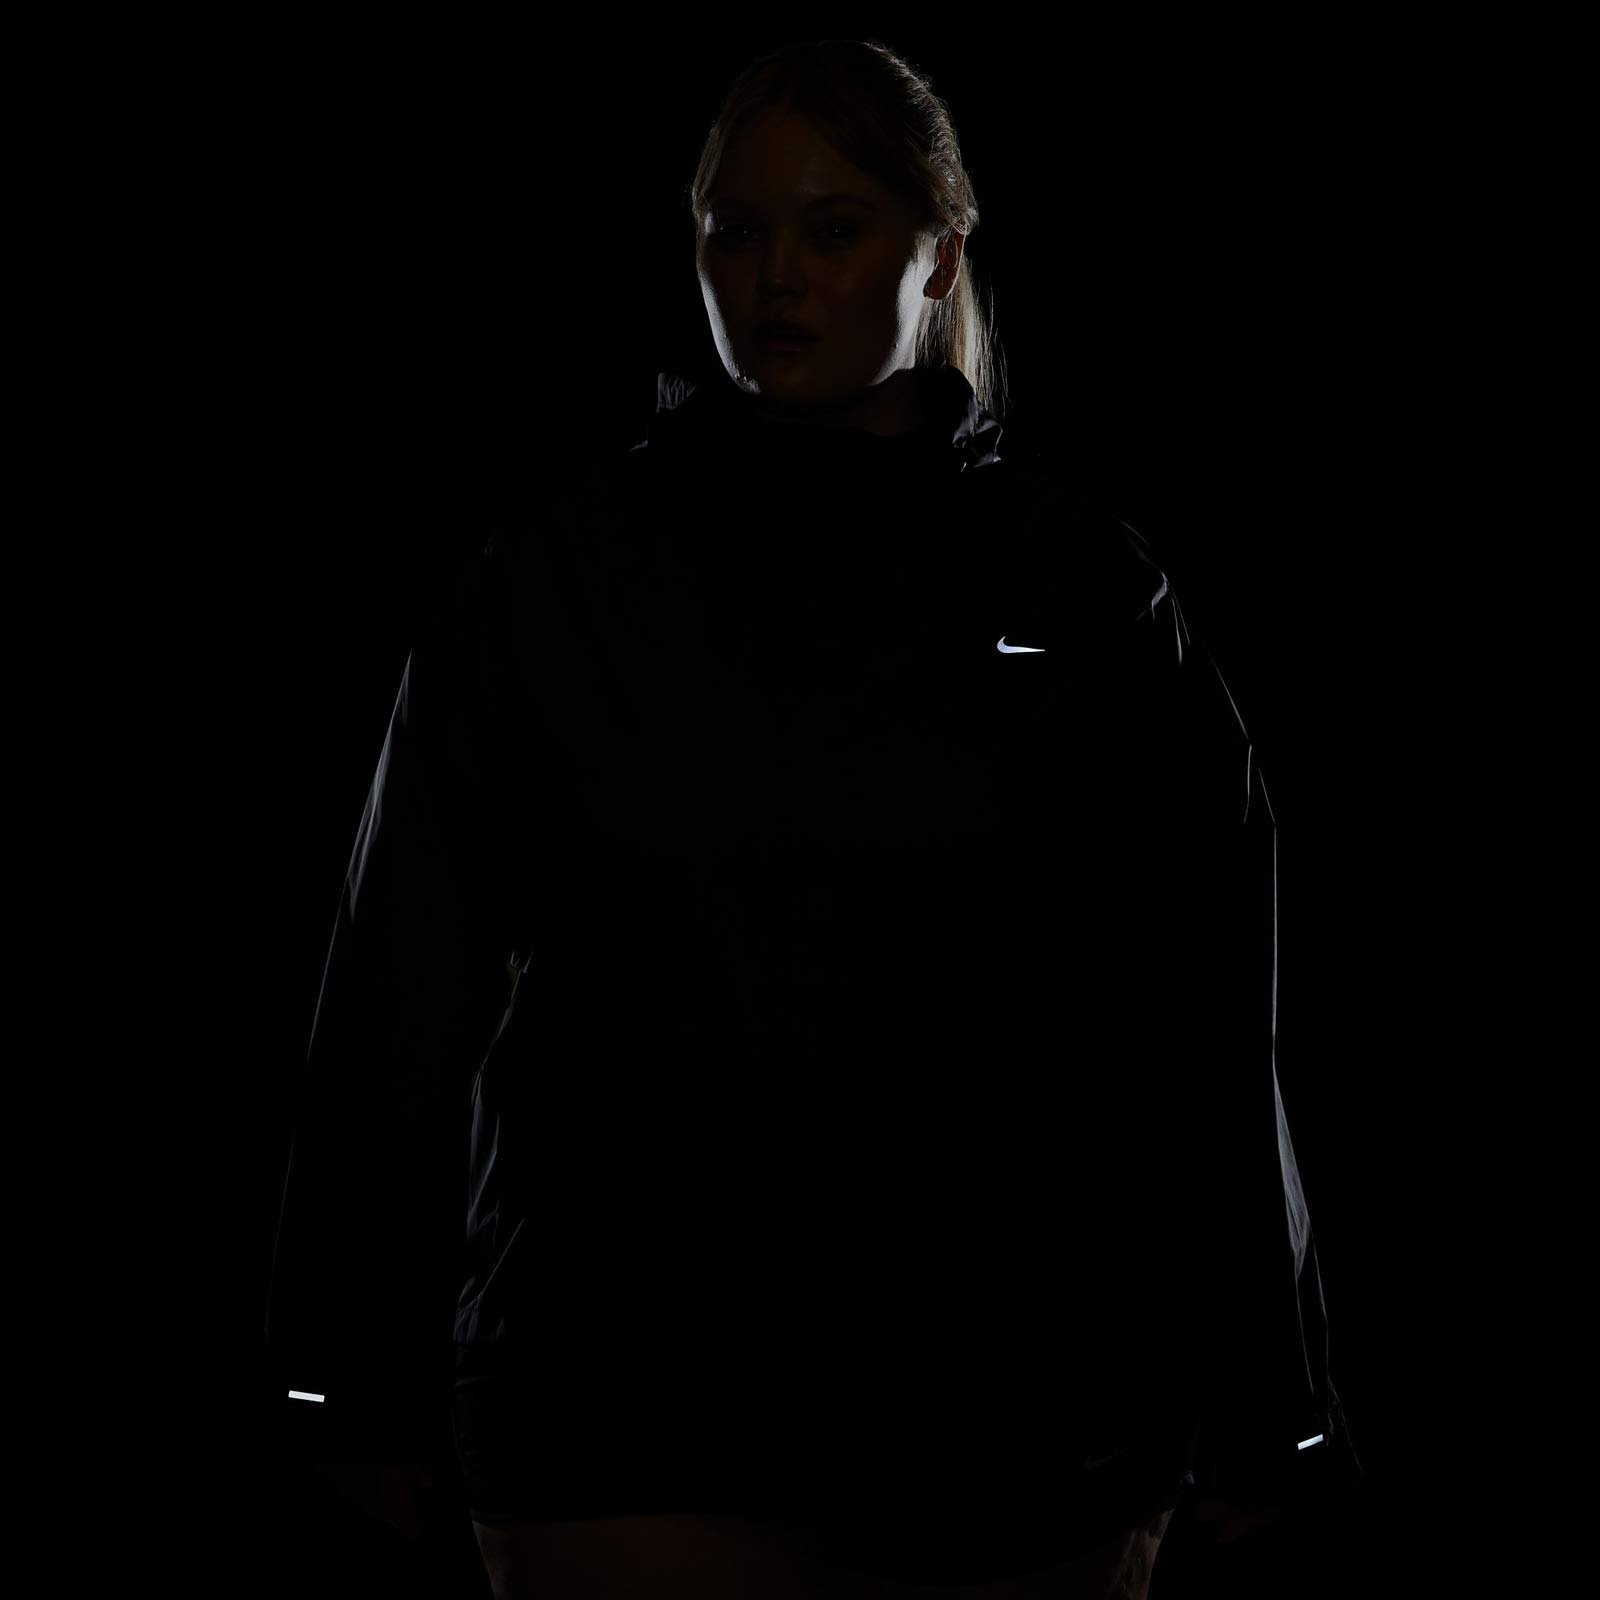 NIKE FAST REPEL WOMENS RUNNING JACKET (PLUS SIZE)